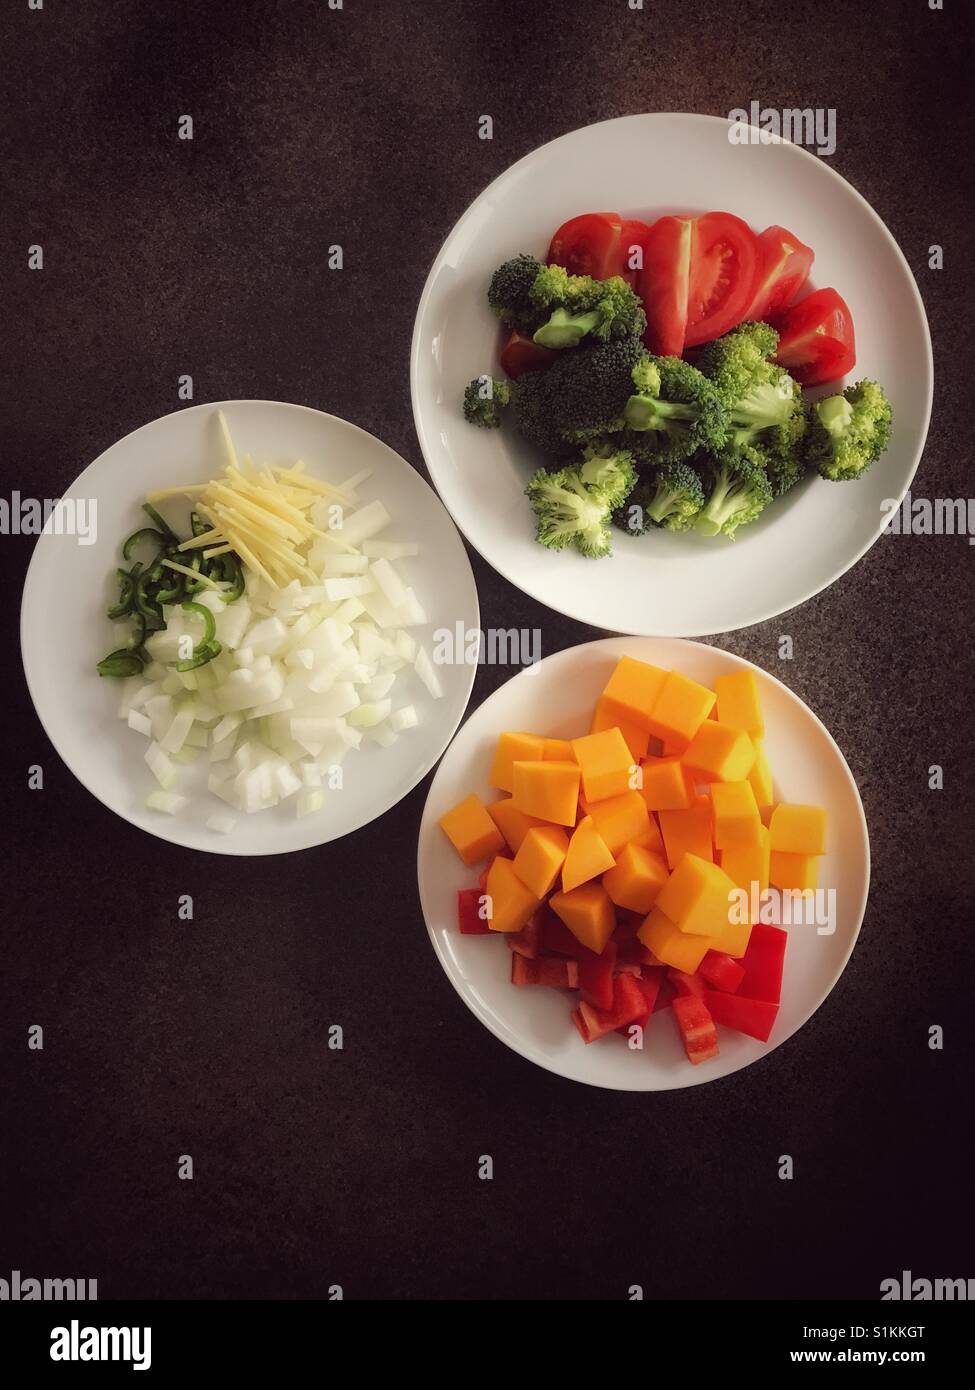 Plates of healthy vegetables, prepared and ready for cooking. Stock Photo